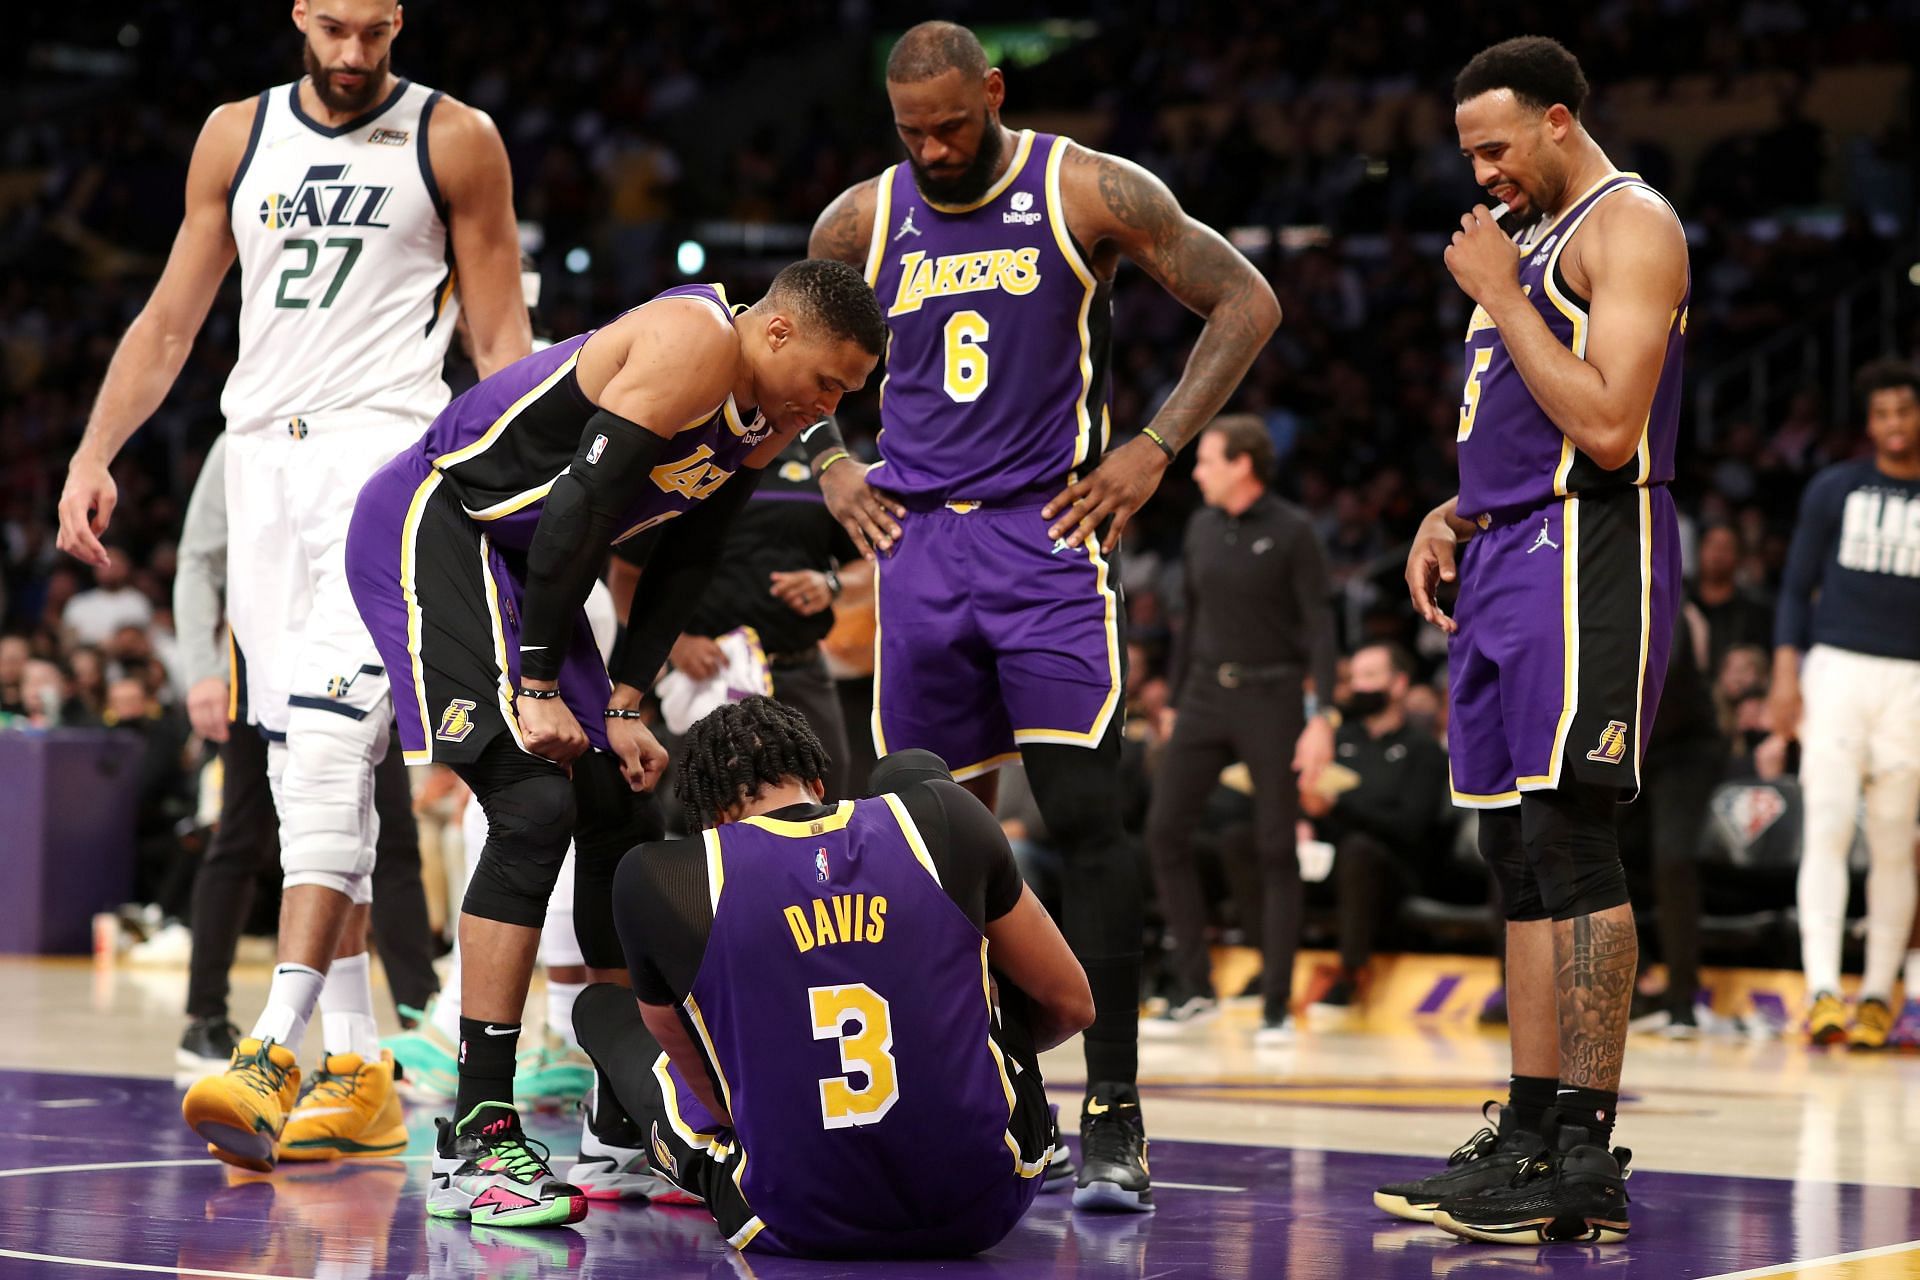 Russell Westbrook #0, LeBron James #6 and Talen Horton-Tucker #5 of the Los Angeles Lakers check up on teammate Anthony Davis #3 after an injury